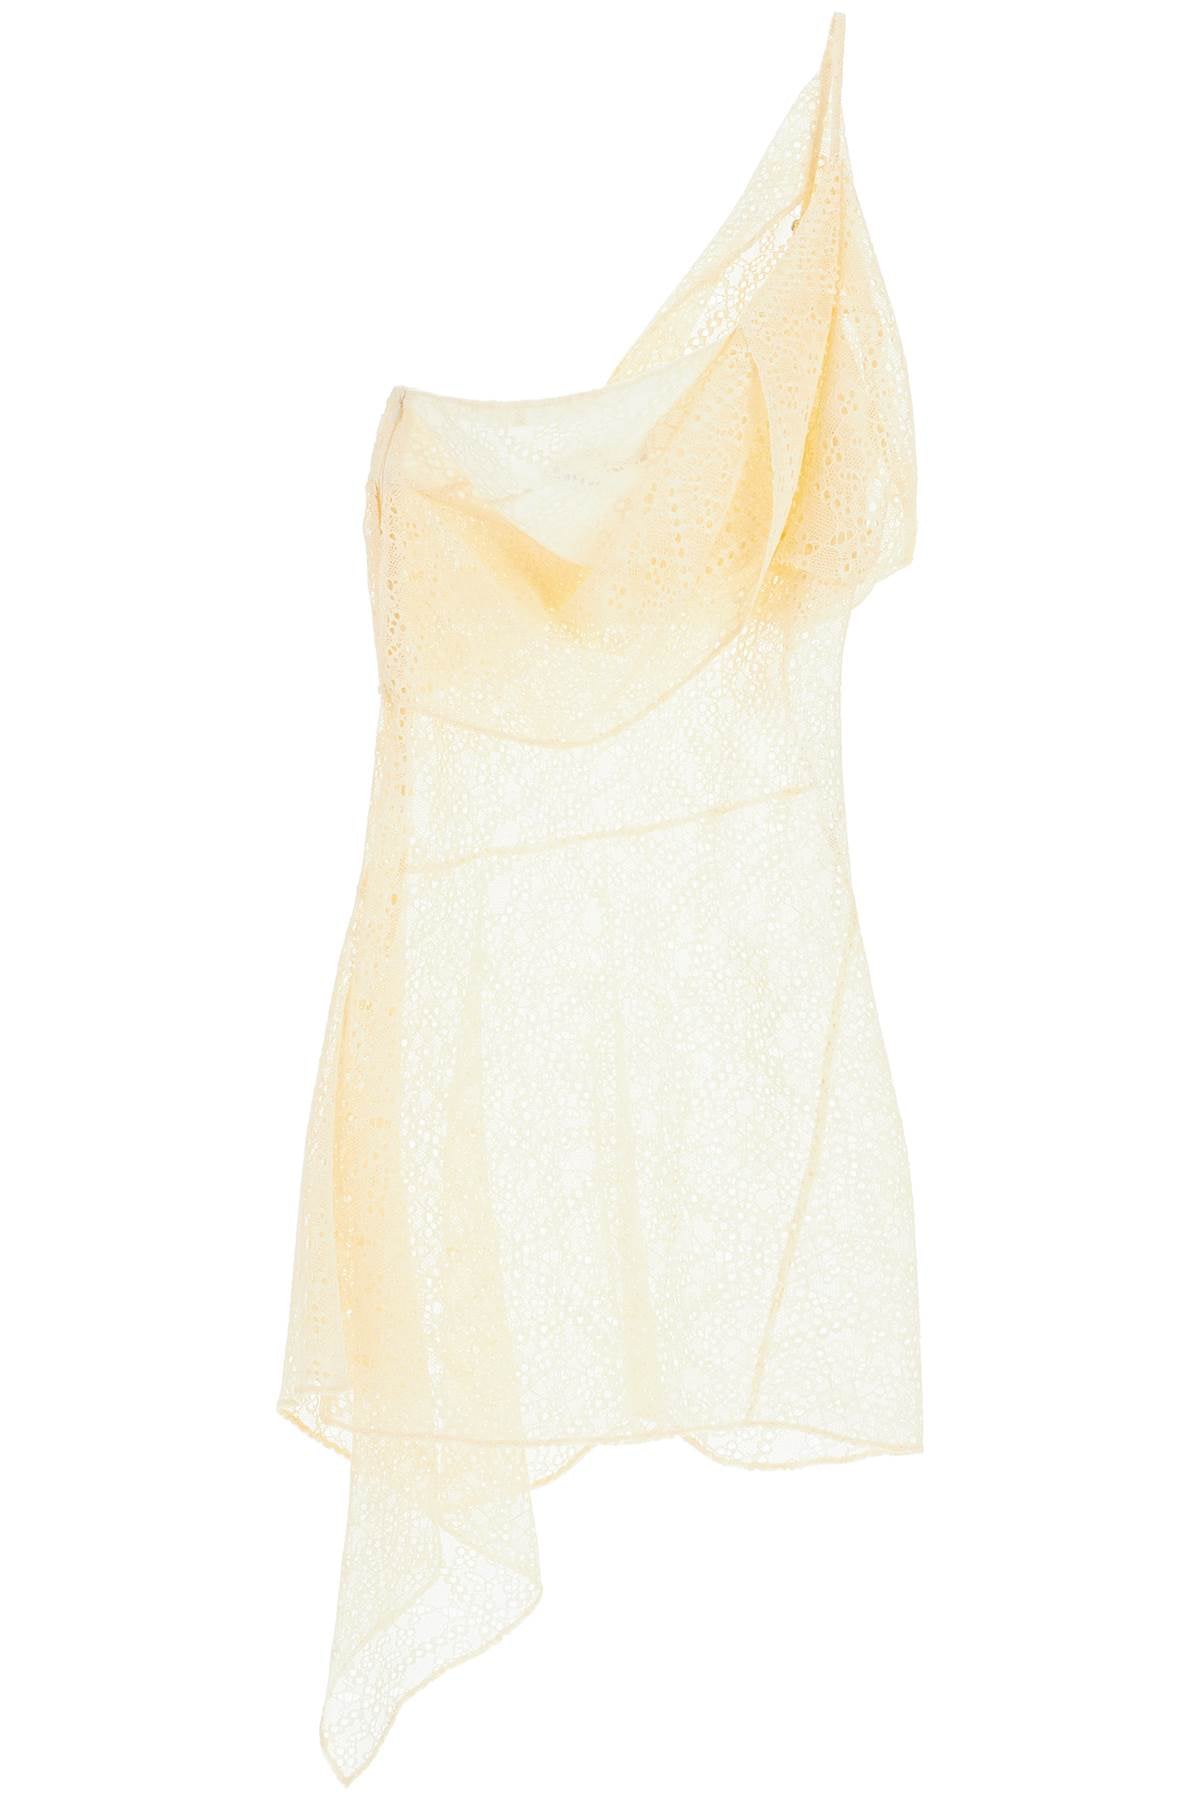 DSQUARED2 Ivory Lace One-Shoulder Slip Minidress with Draped Neckline and Asymmetric Skirt